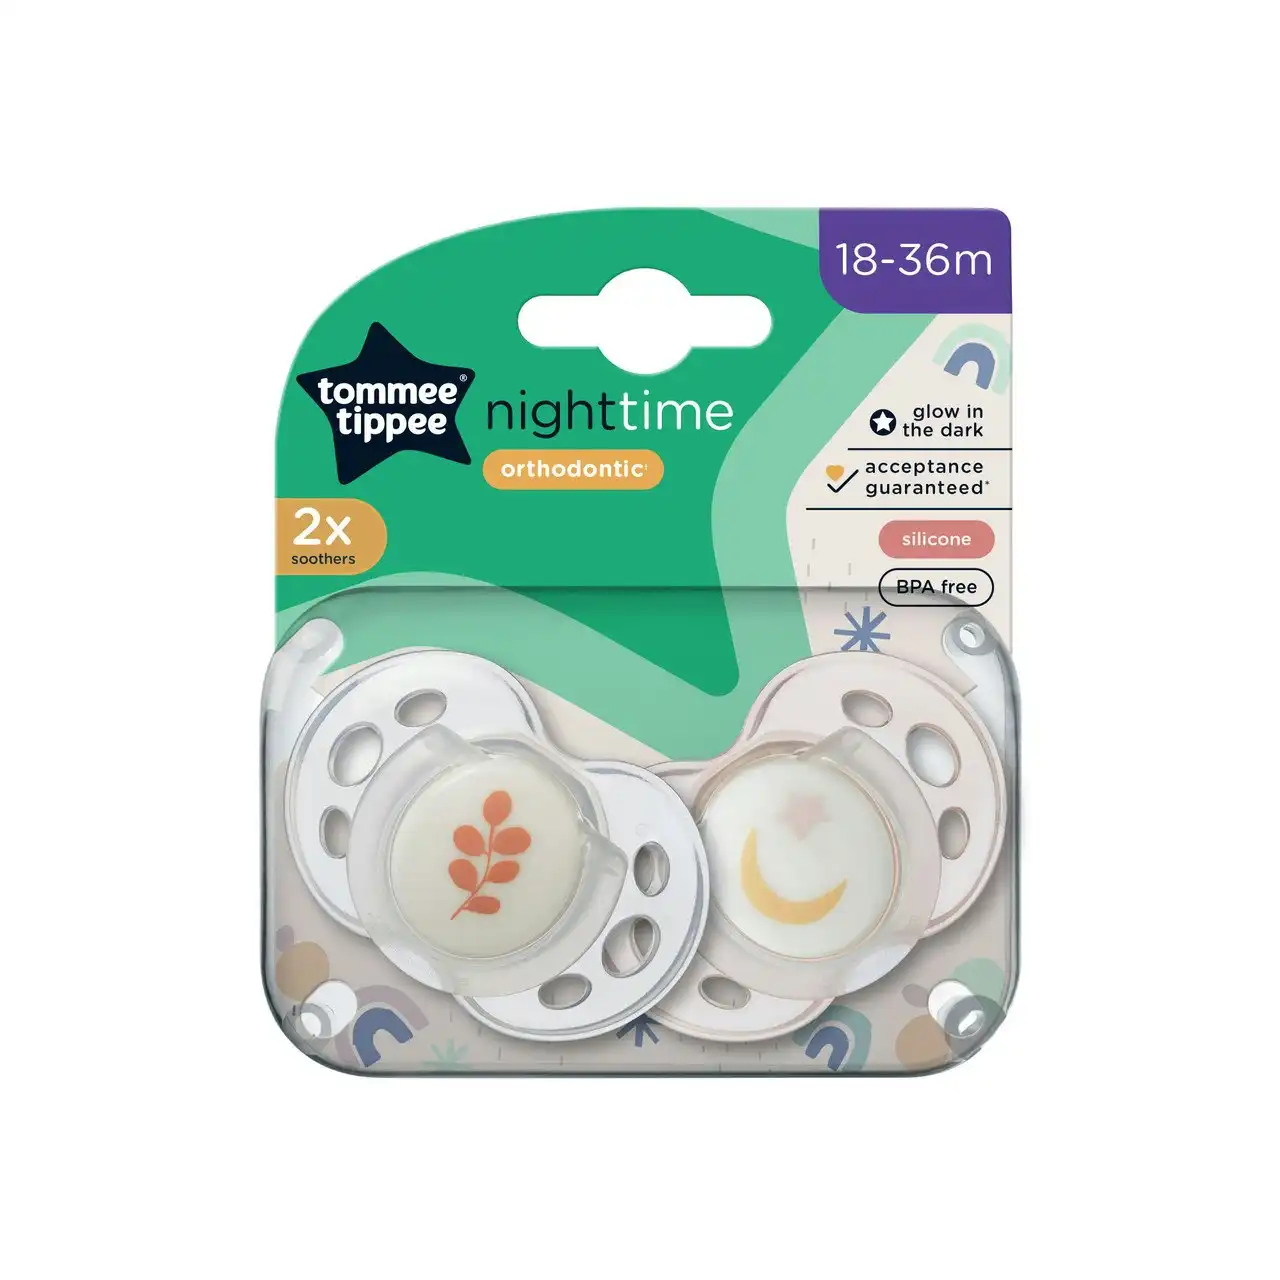 Tommee Tippee Nighttime soother, 18-36 months, 2 pack of glow in the dark soothers with reusable steriliser pod